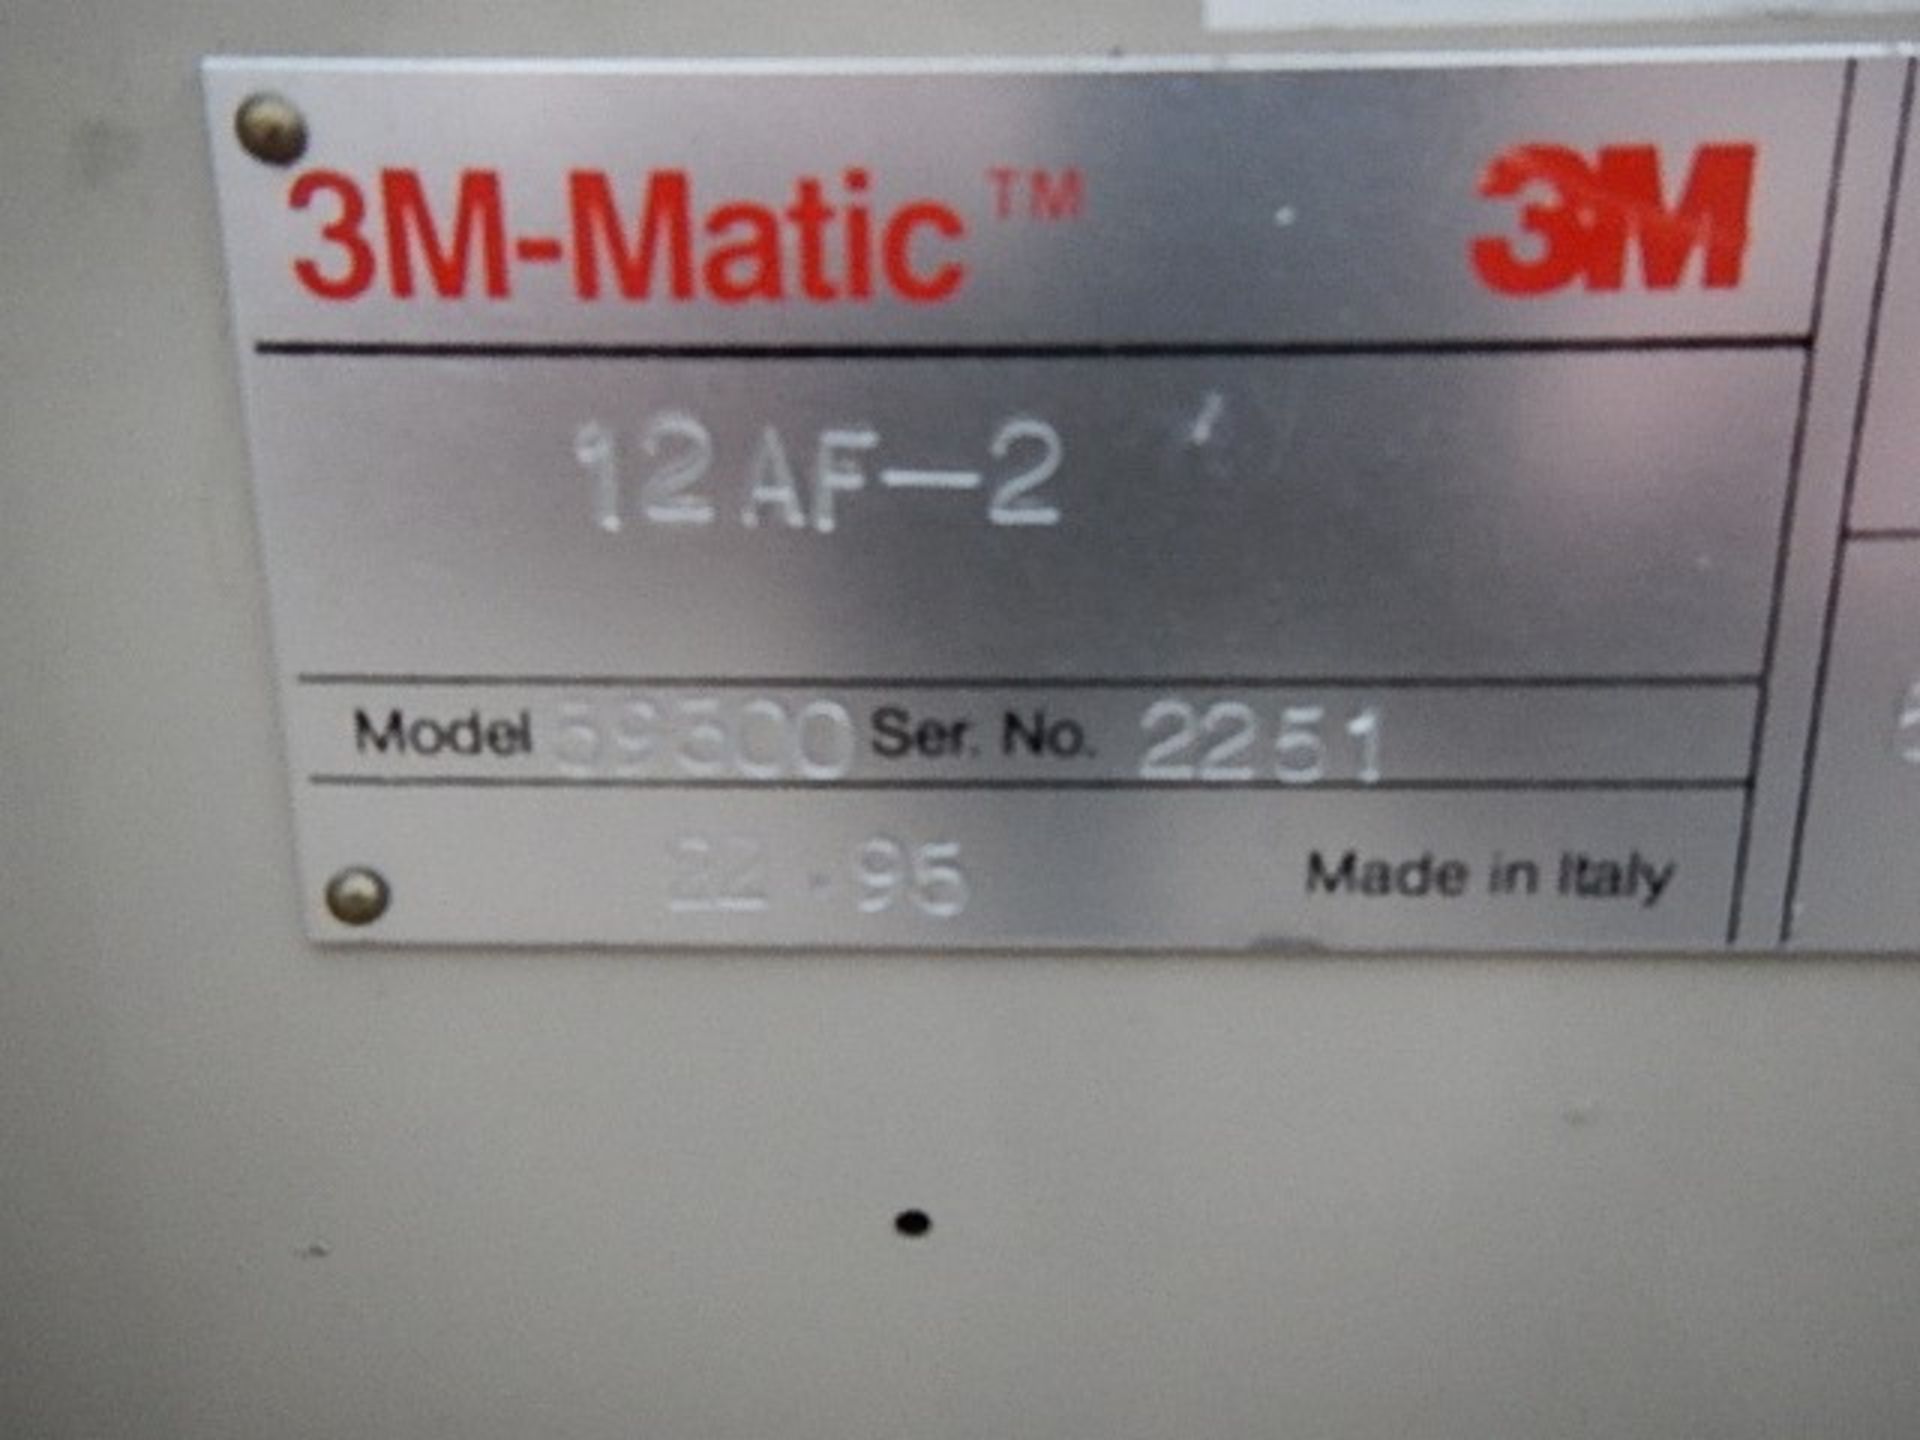 3M-Matic 12AF-2, type 59300 case sealer capable of - Image 6 of 9